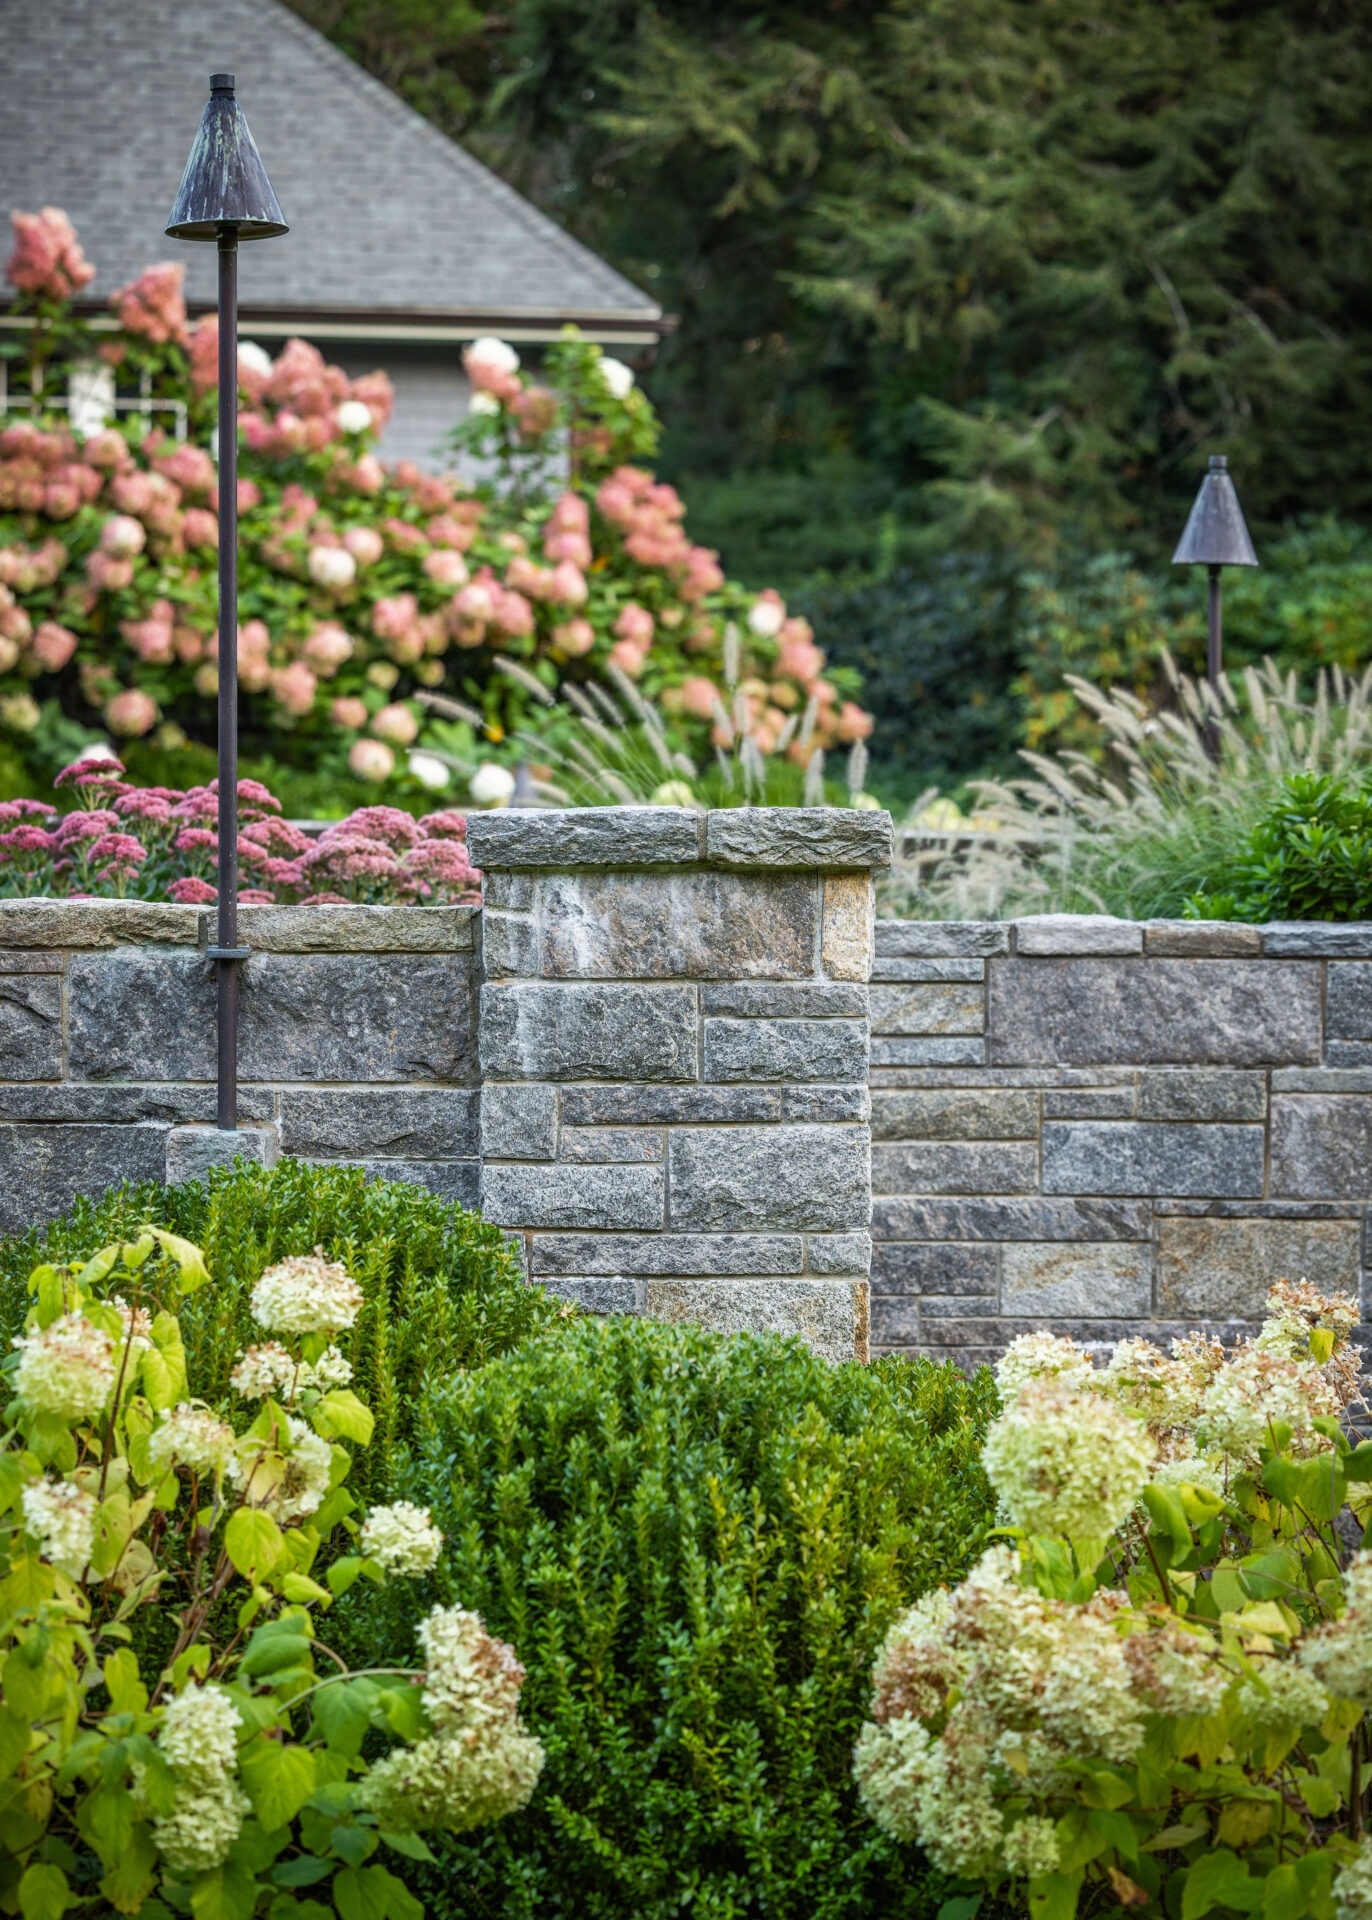 A landscaped garden with a stone wall, lush greenery, hydrangea flowers, and a path lamp. A house and trees are visible in the background.